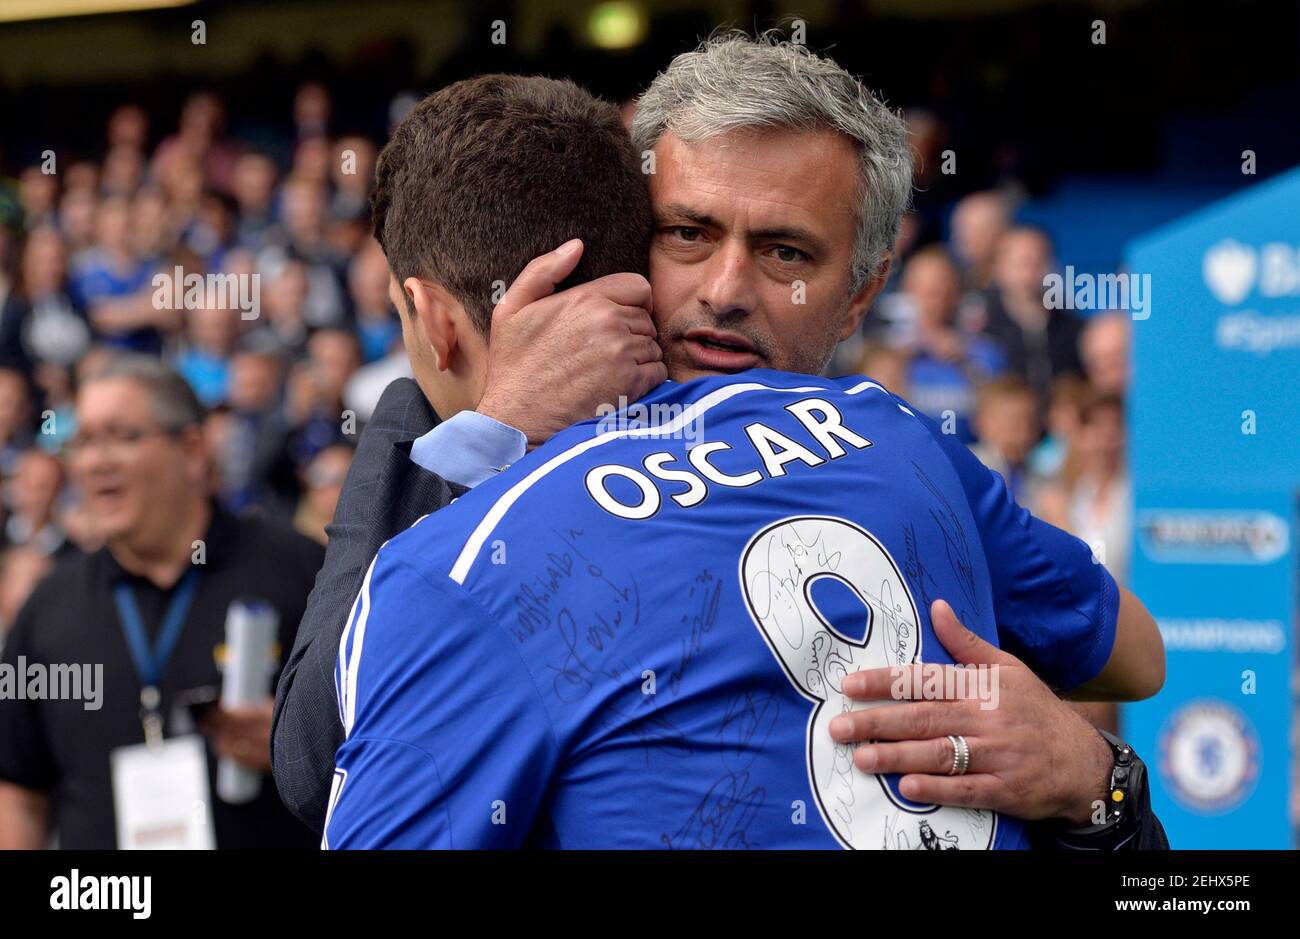 Football - Chelsea v Sunderland - Barclays Premier League - Stamford Bridge - 24/5/15 Chelsea manager Jose Mourinho celebrates with Oscar after winning the Barclays Premier League Action Images via Reuters / Adam Holt Livepic EDITORIAL USE ONLY. No use with unauthorized audio, video, data, fixture lists, club/league logos or 'live' services. Online in-match use limited to 45 images, no video emulation. No use in betting, games or single club/league/player publications.  Please contact your account representative for further details. Stock Photo